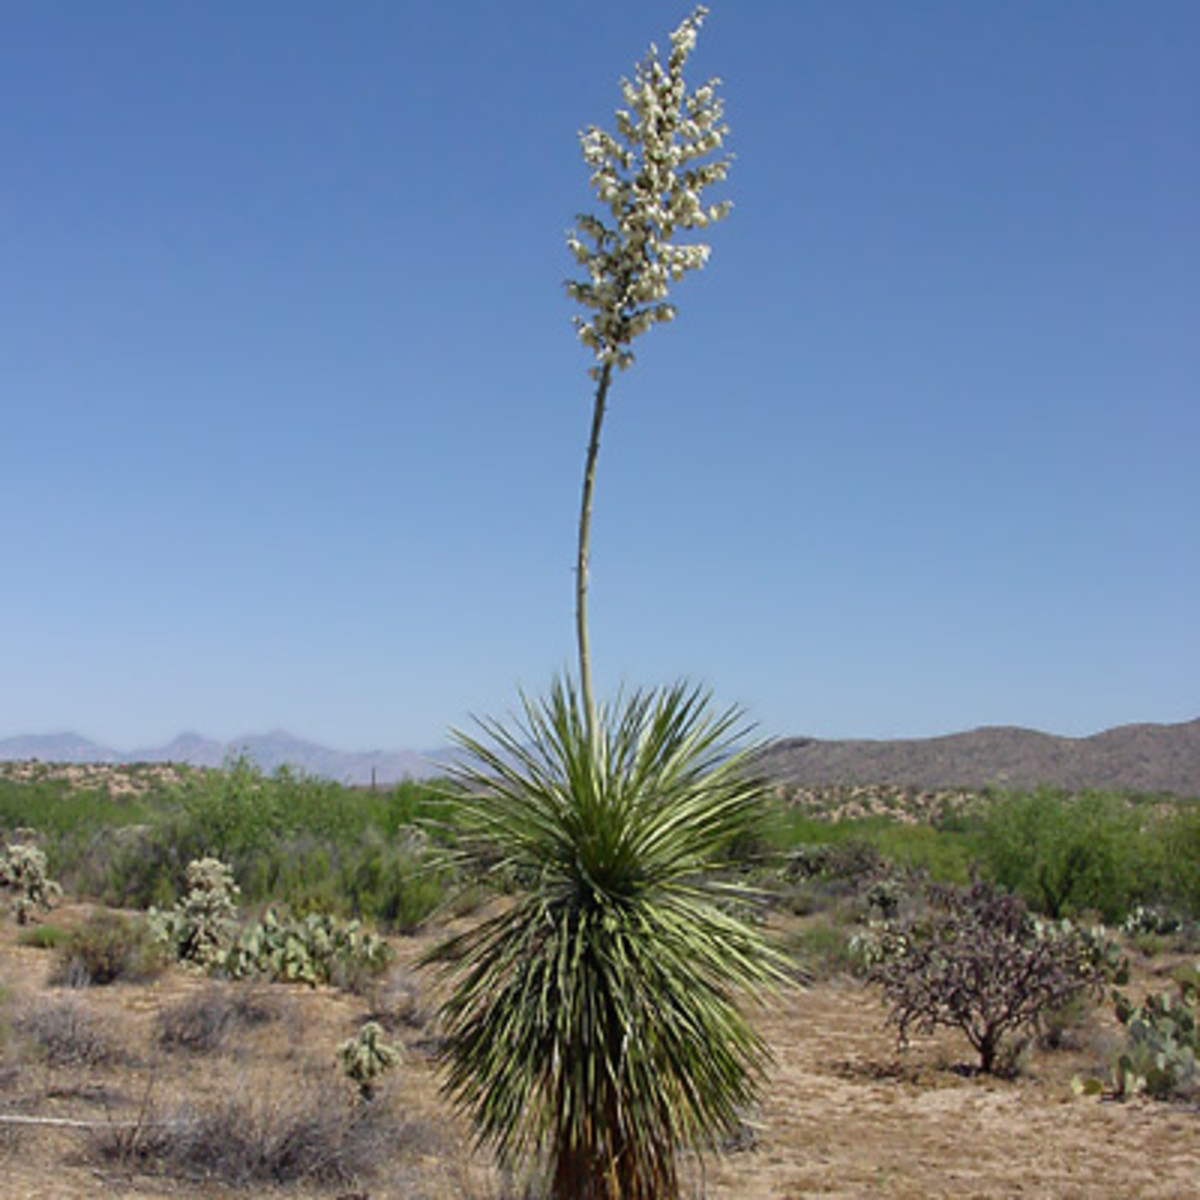 Saponin extract in Yucca can reduce swelling and pain associated with osteoarthritis